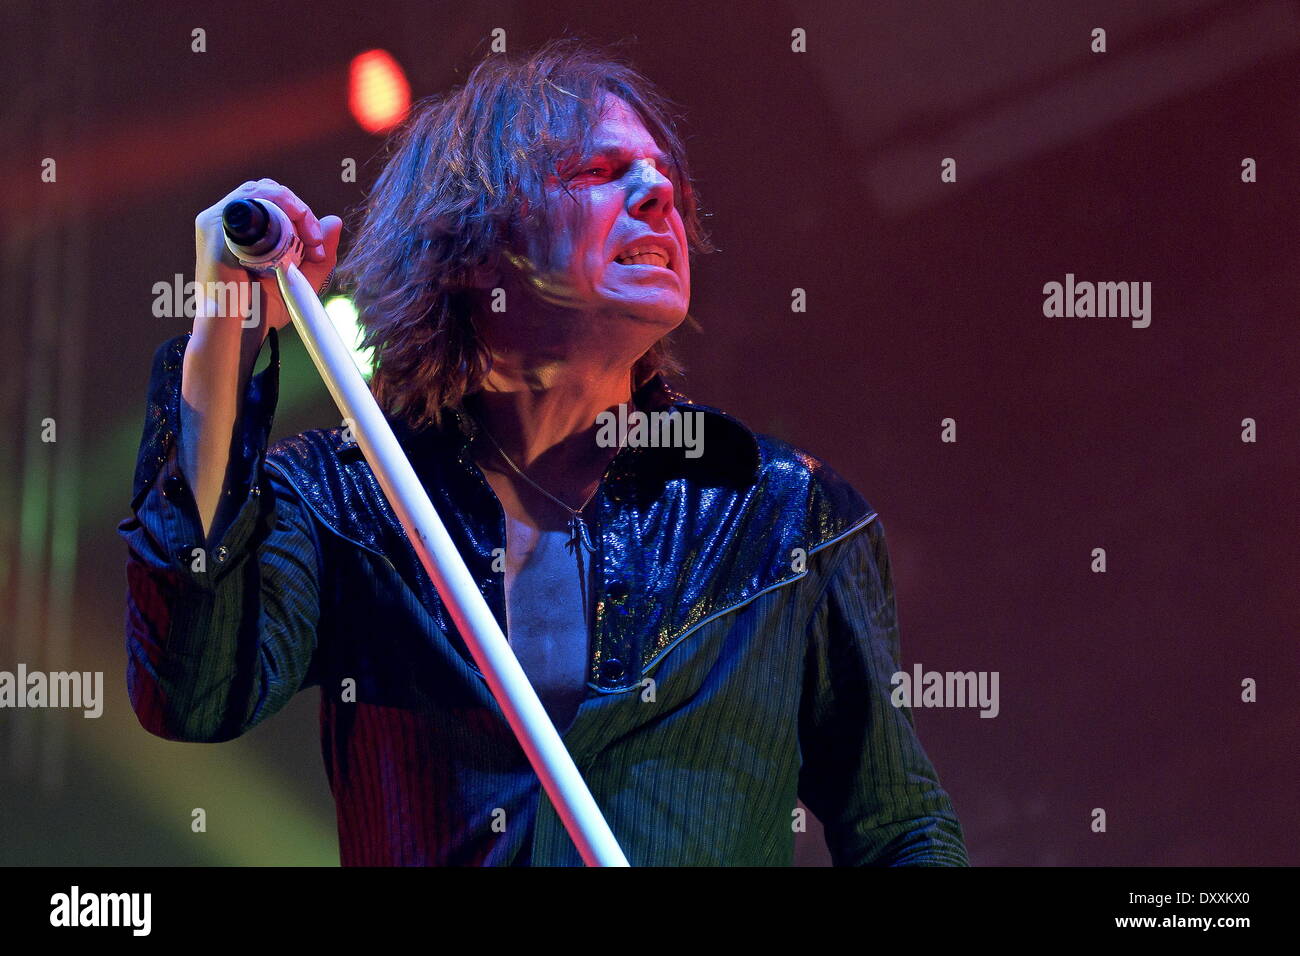 Joey Tempest Of Europe Stock Photos & Joey Tempest Of Europe Stock ...